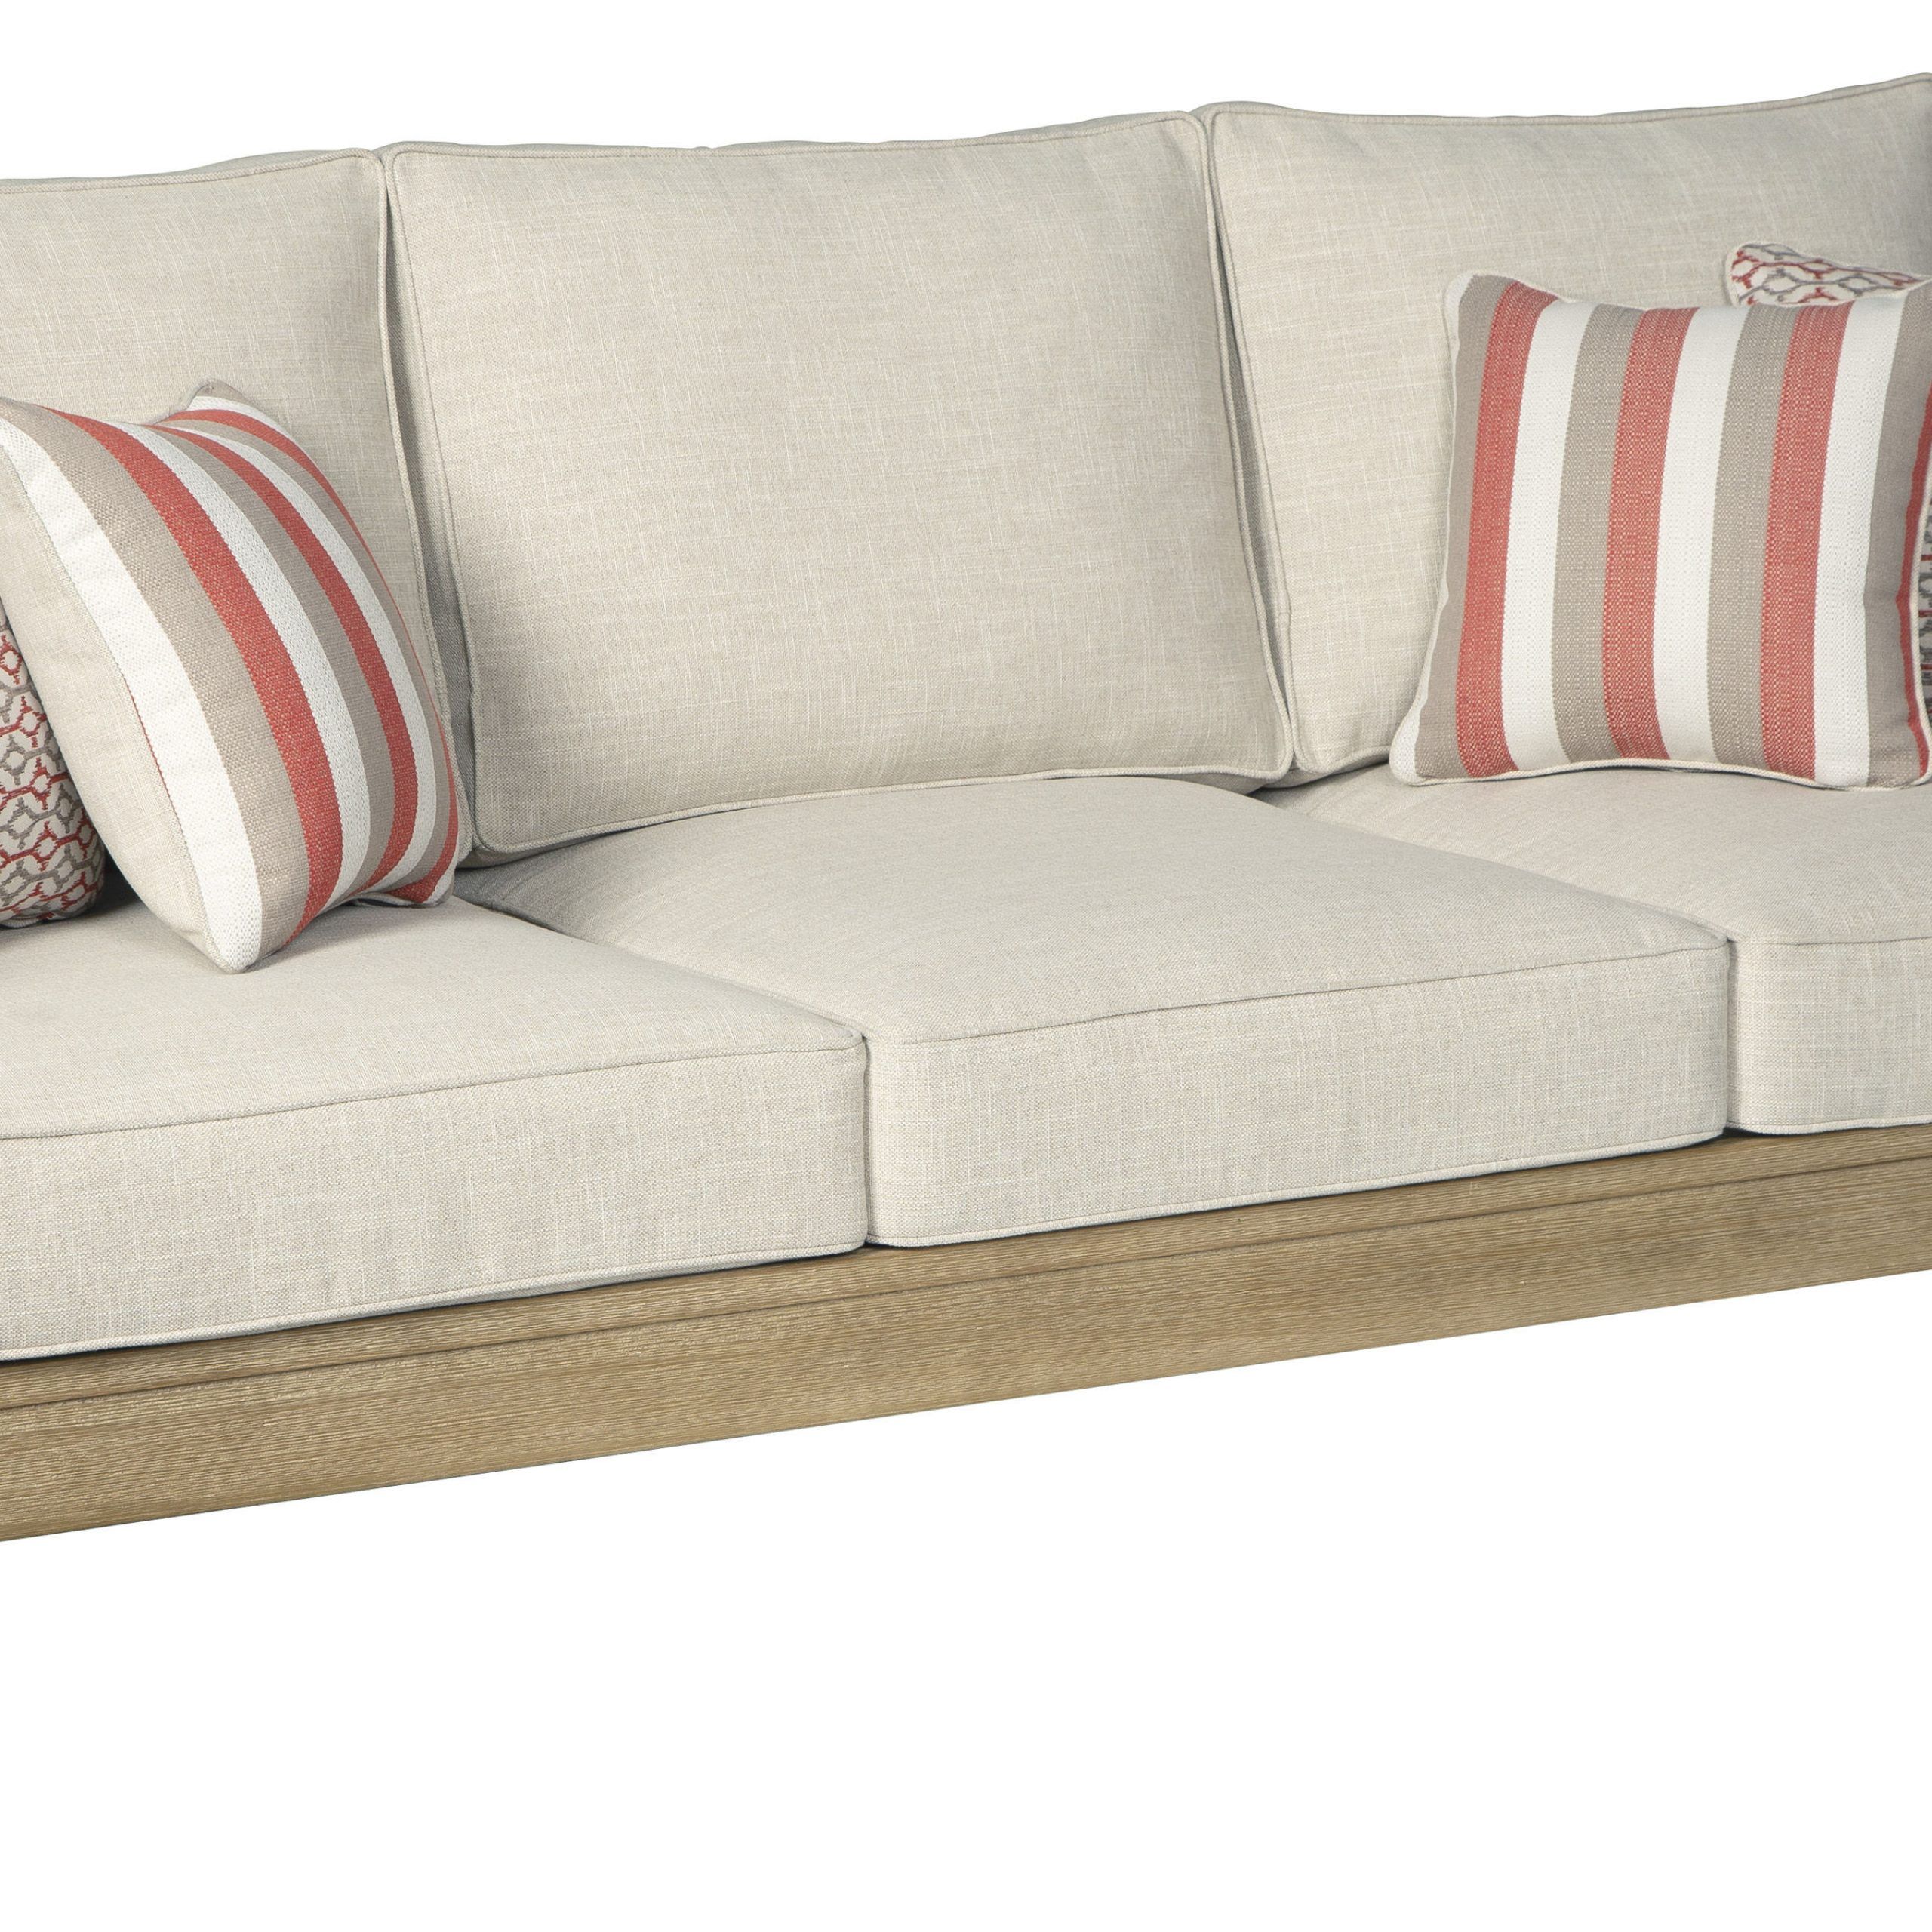 Ashley Furniture Clare View Beige Wood Sofa | The Classy Home With Regard To Ecru And Otter Console Tables (View 3 of 20)